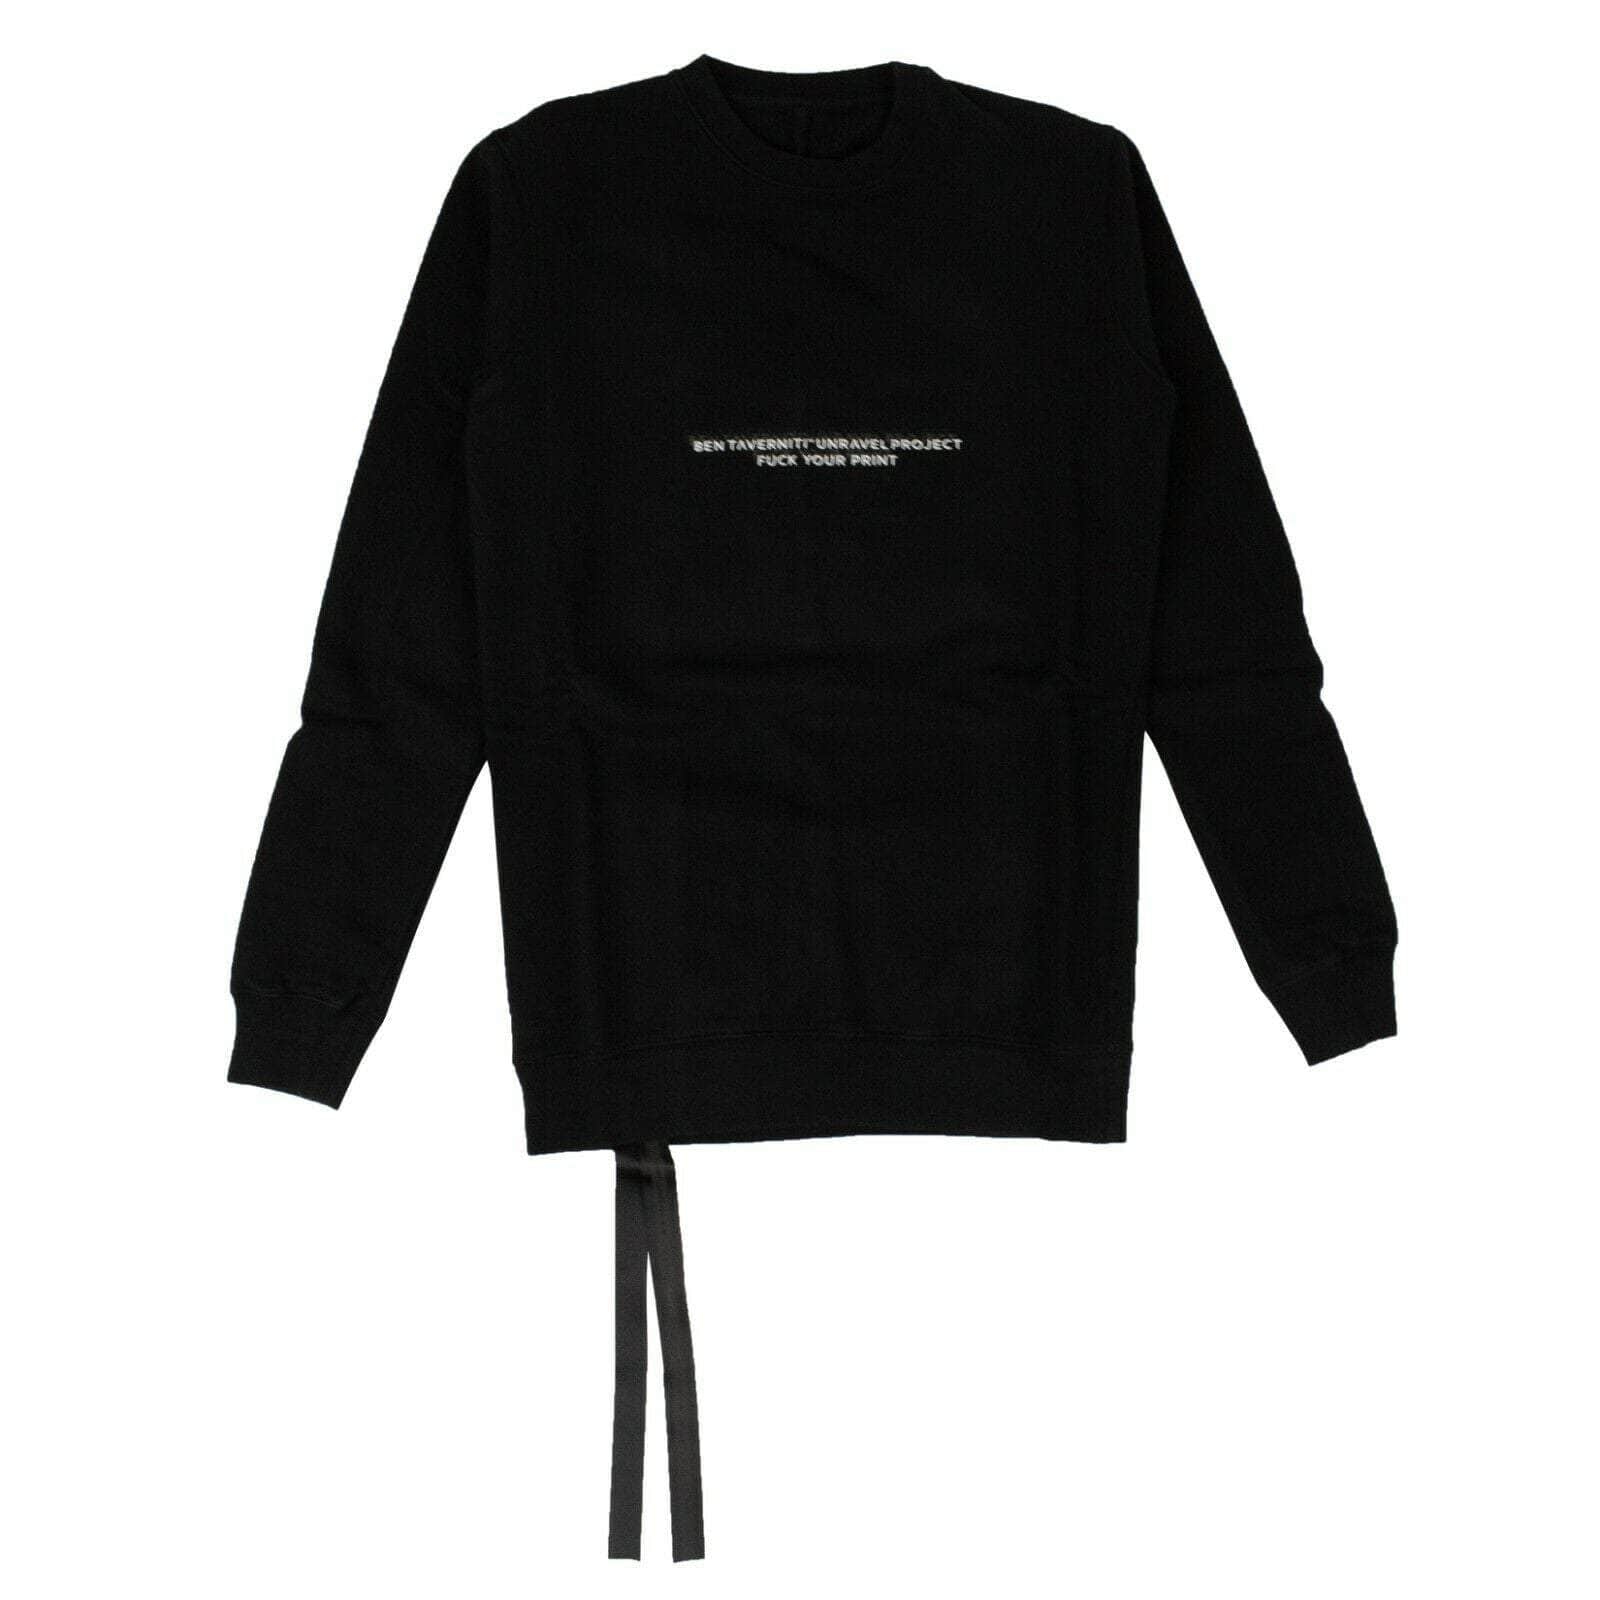 UNRAVEL PROJECT channelenable-all, couponcollection, gender-mens, main-clothing, mens-pullover-sweaters, size-l, size-m, size-s, under-250, unravel-project Black Cotton Slogan Print Longline Sweatshirt